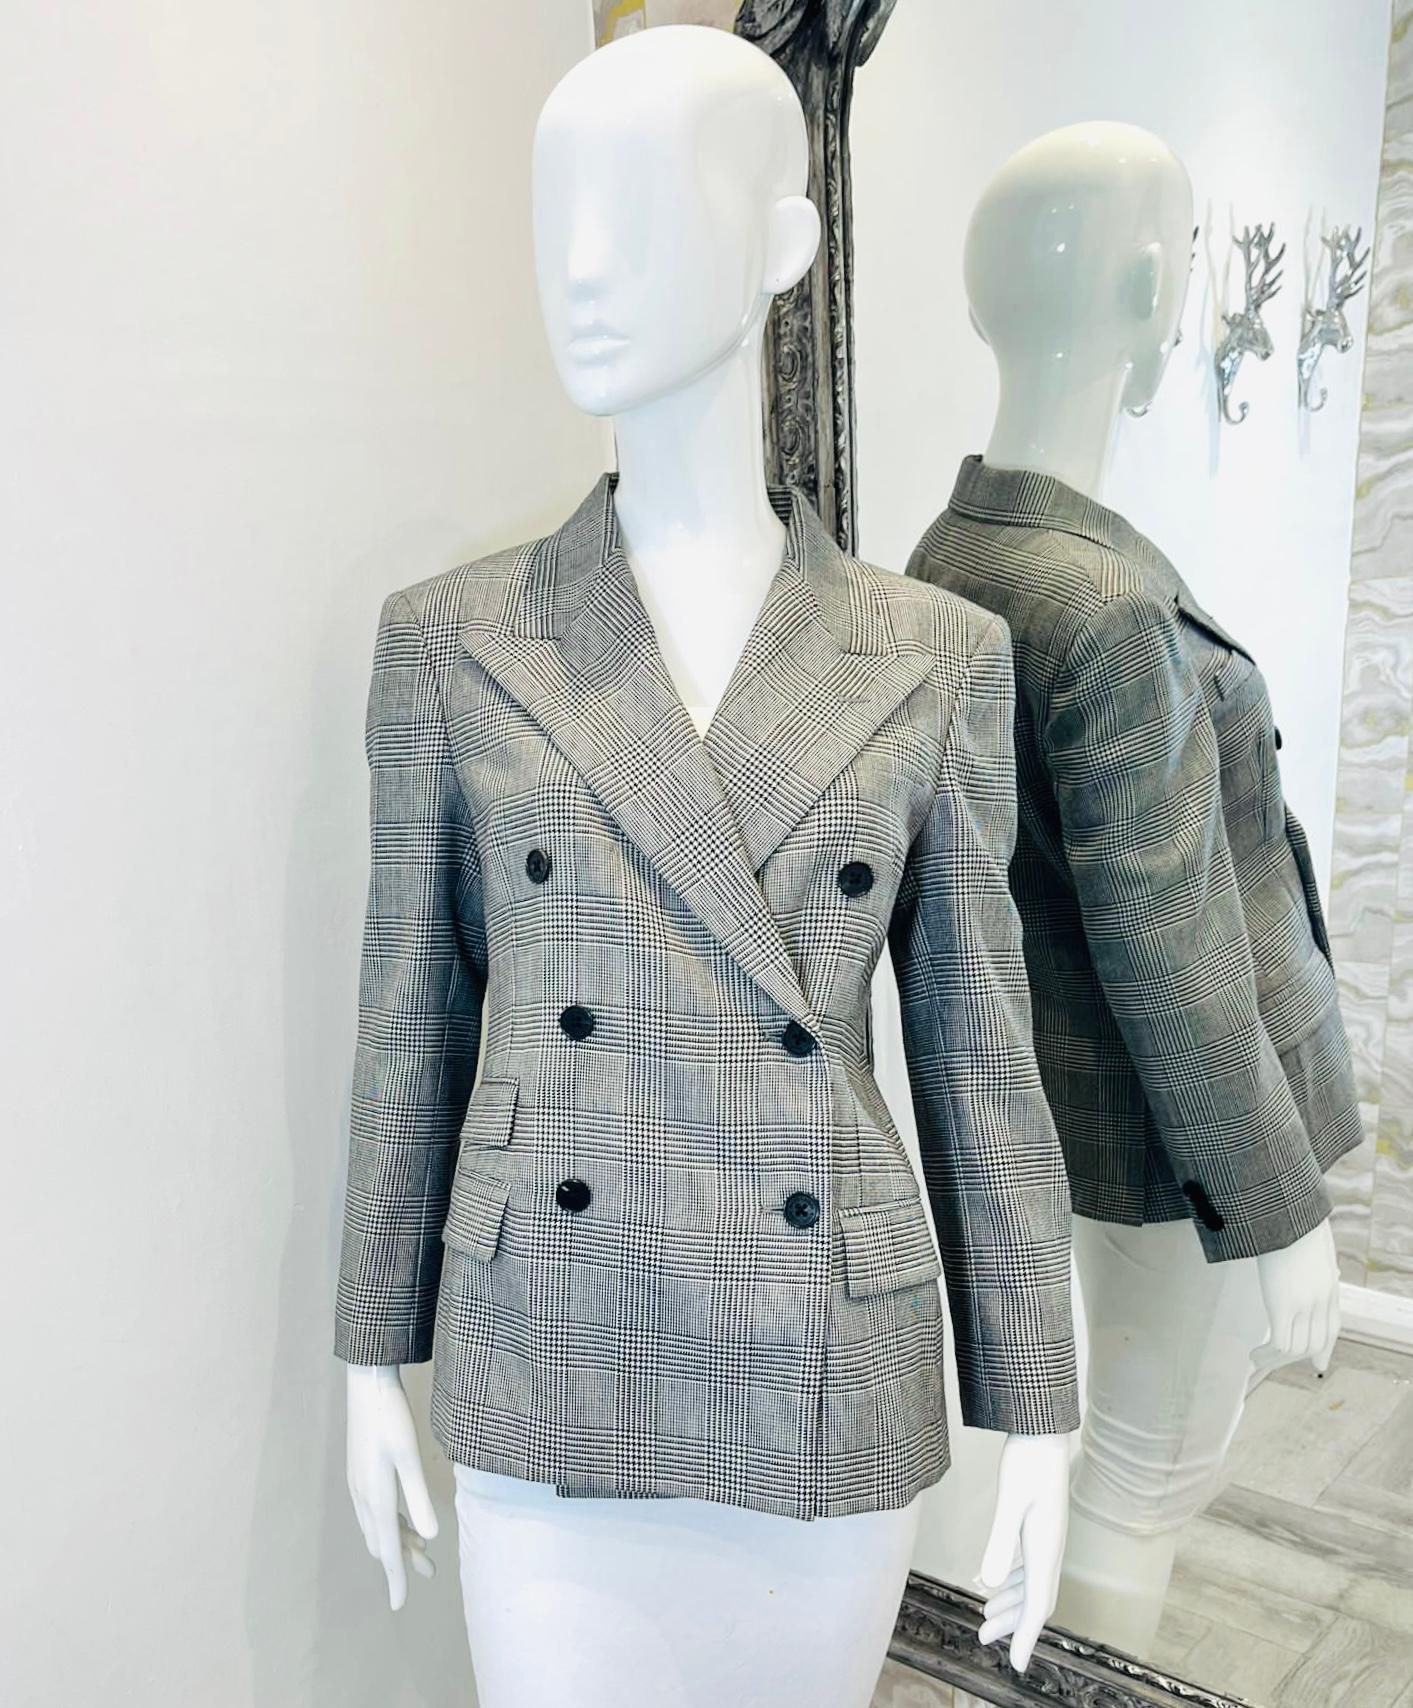 Ralph Lauren Wool Blazer

Double breasted 'Elske' blazer designed with check houndstooth pattern in grey.

Detailed with notched lapels and three side flap pockets.

Featuring buttoned cuffs with 'Ralph Lauren' logo engravement. Rrp £2193

Size –